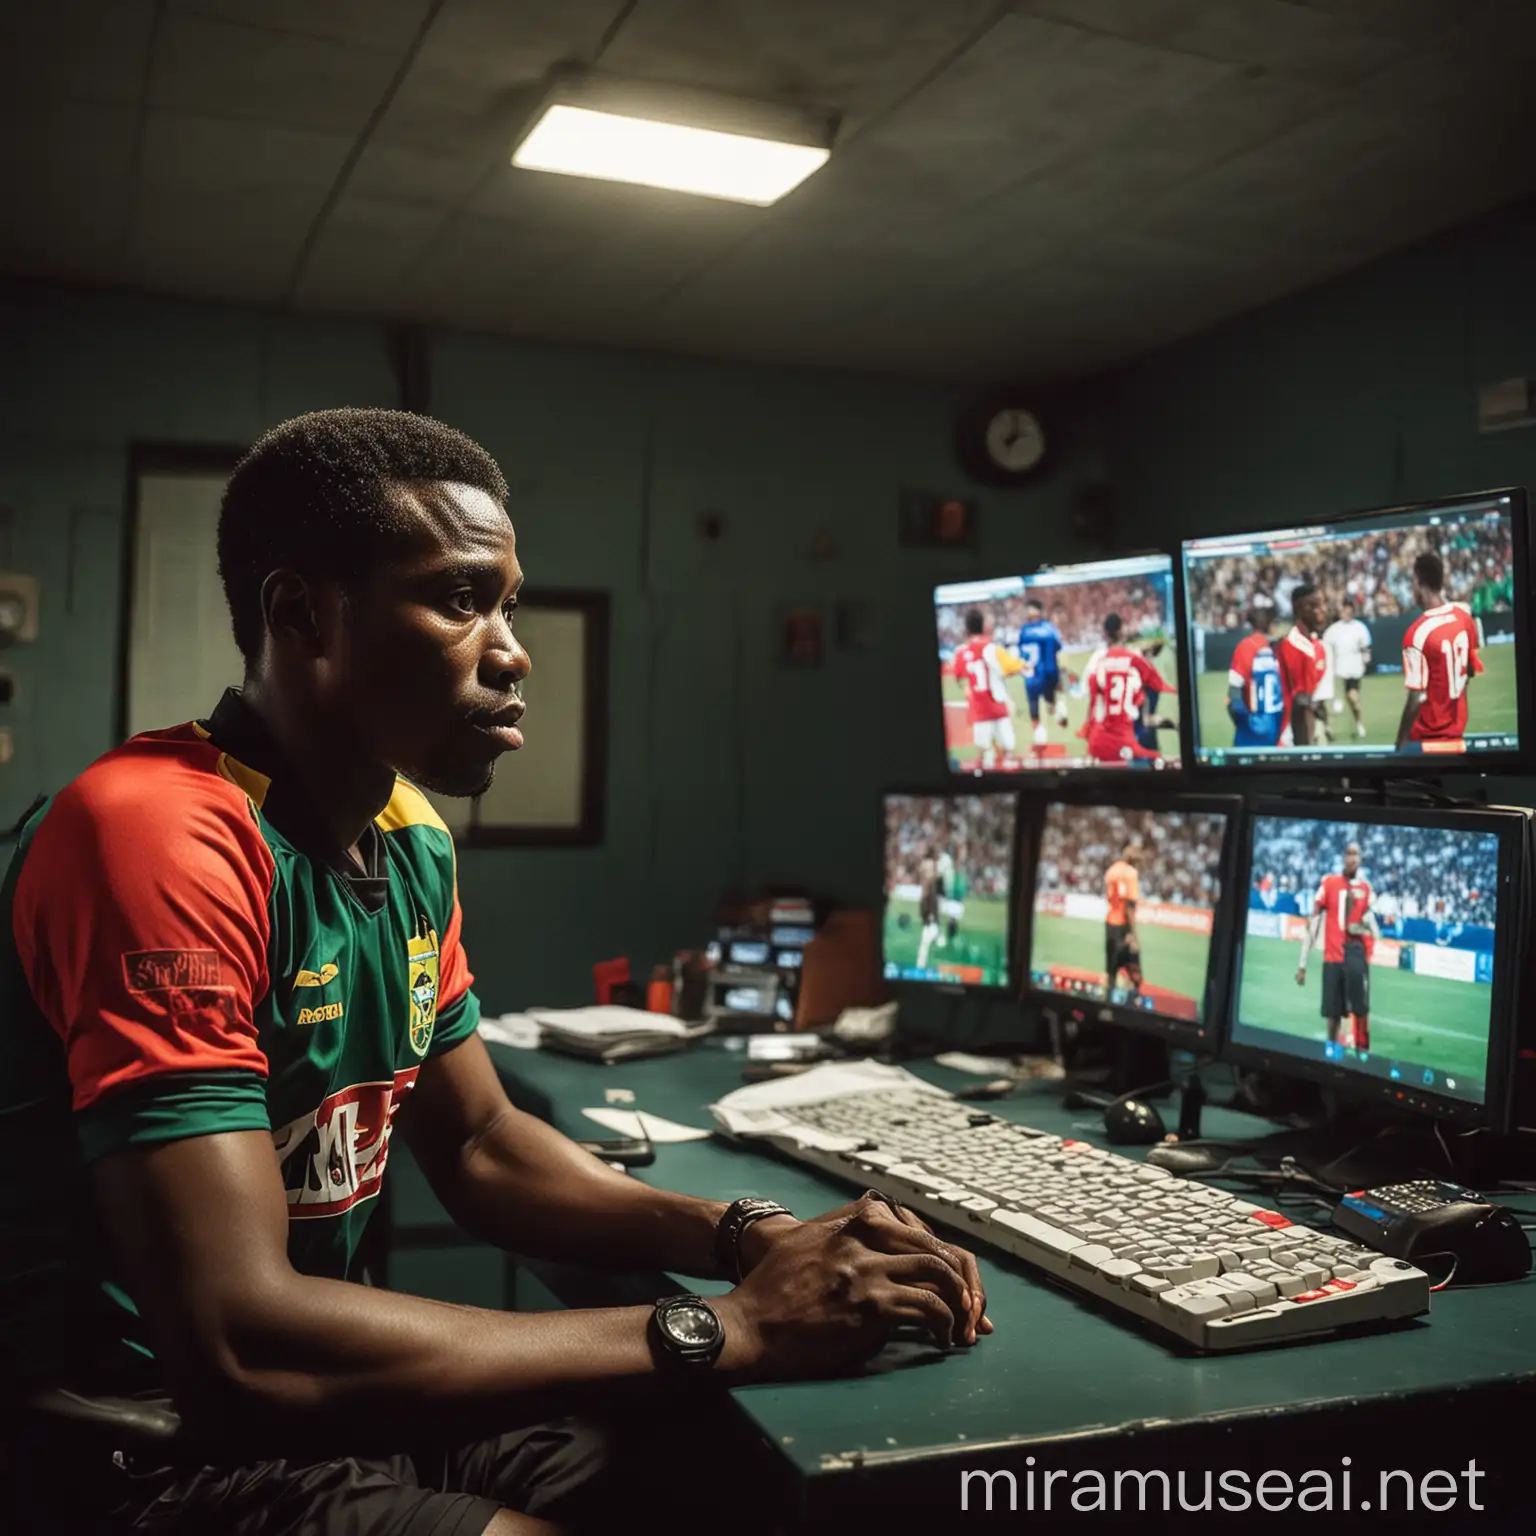 Professional CongoBrazzaville Referee Monitoring VAR in Football Control Room